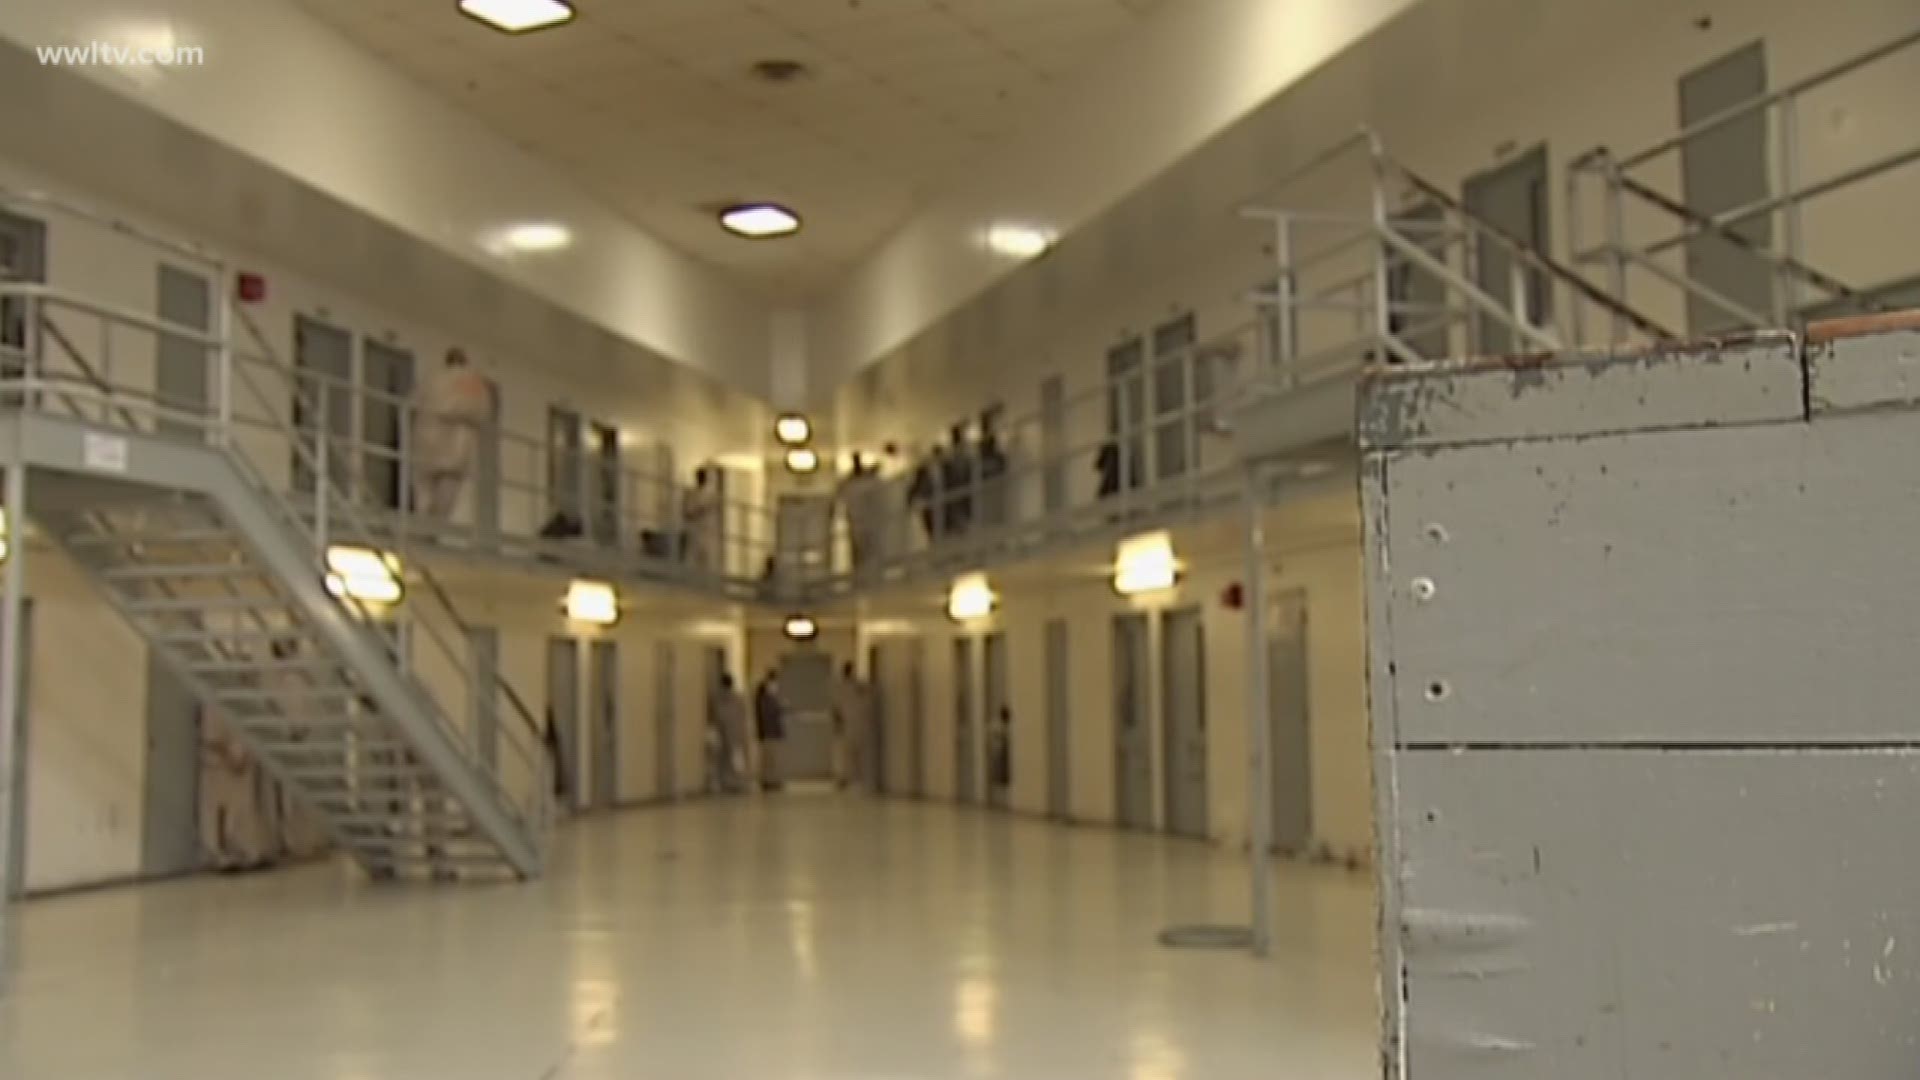 According to the ACLU, the state's incarceration rate is the second highest in the nation, right behind Oklahoma. 